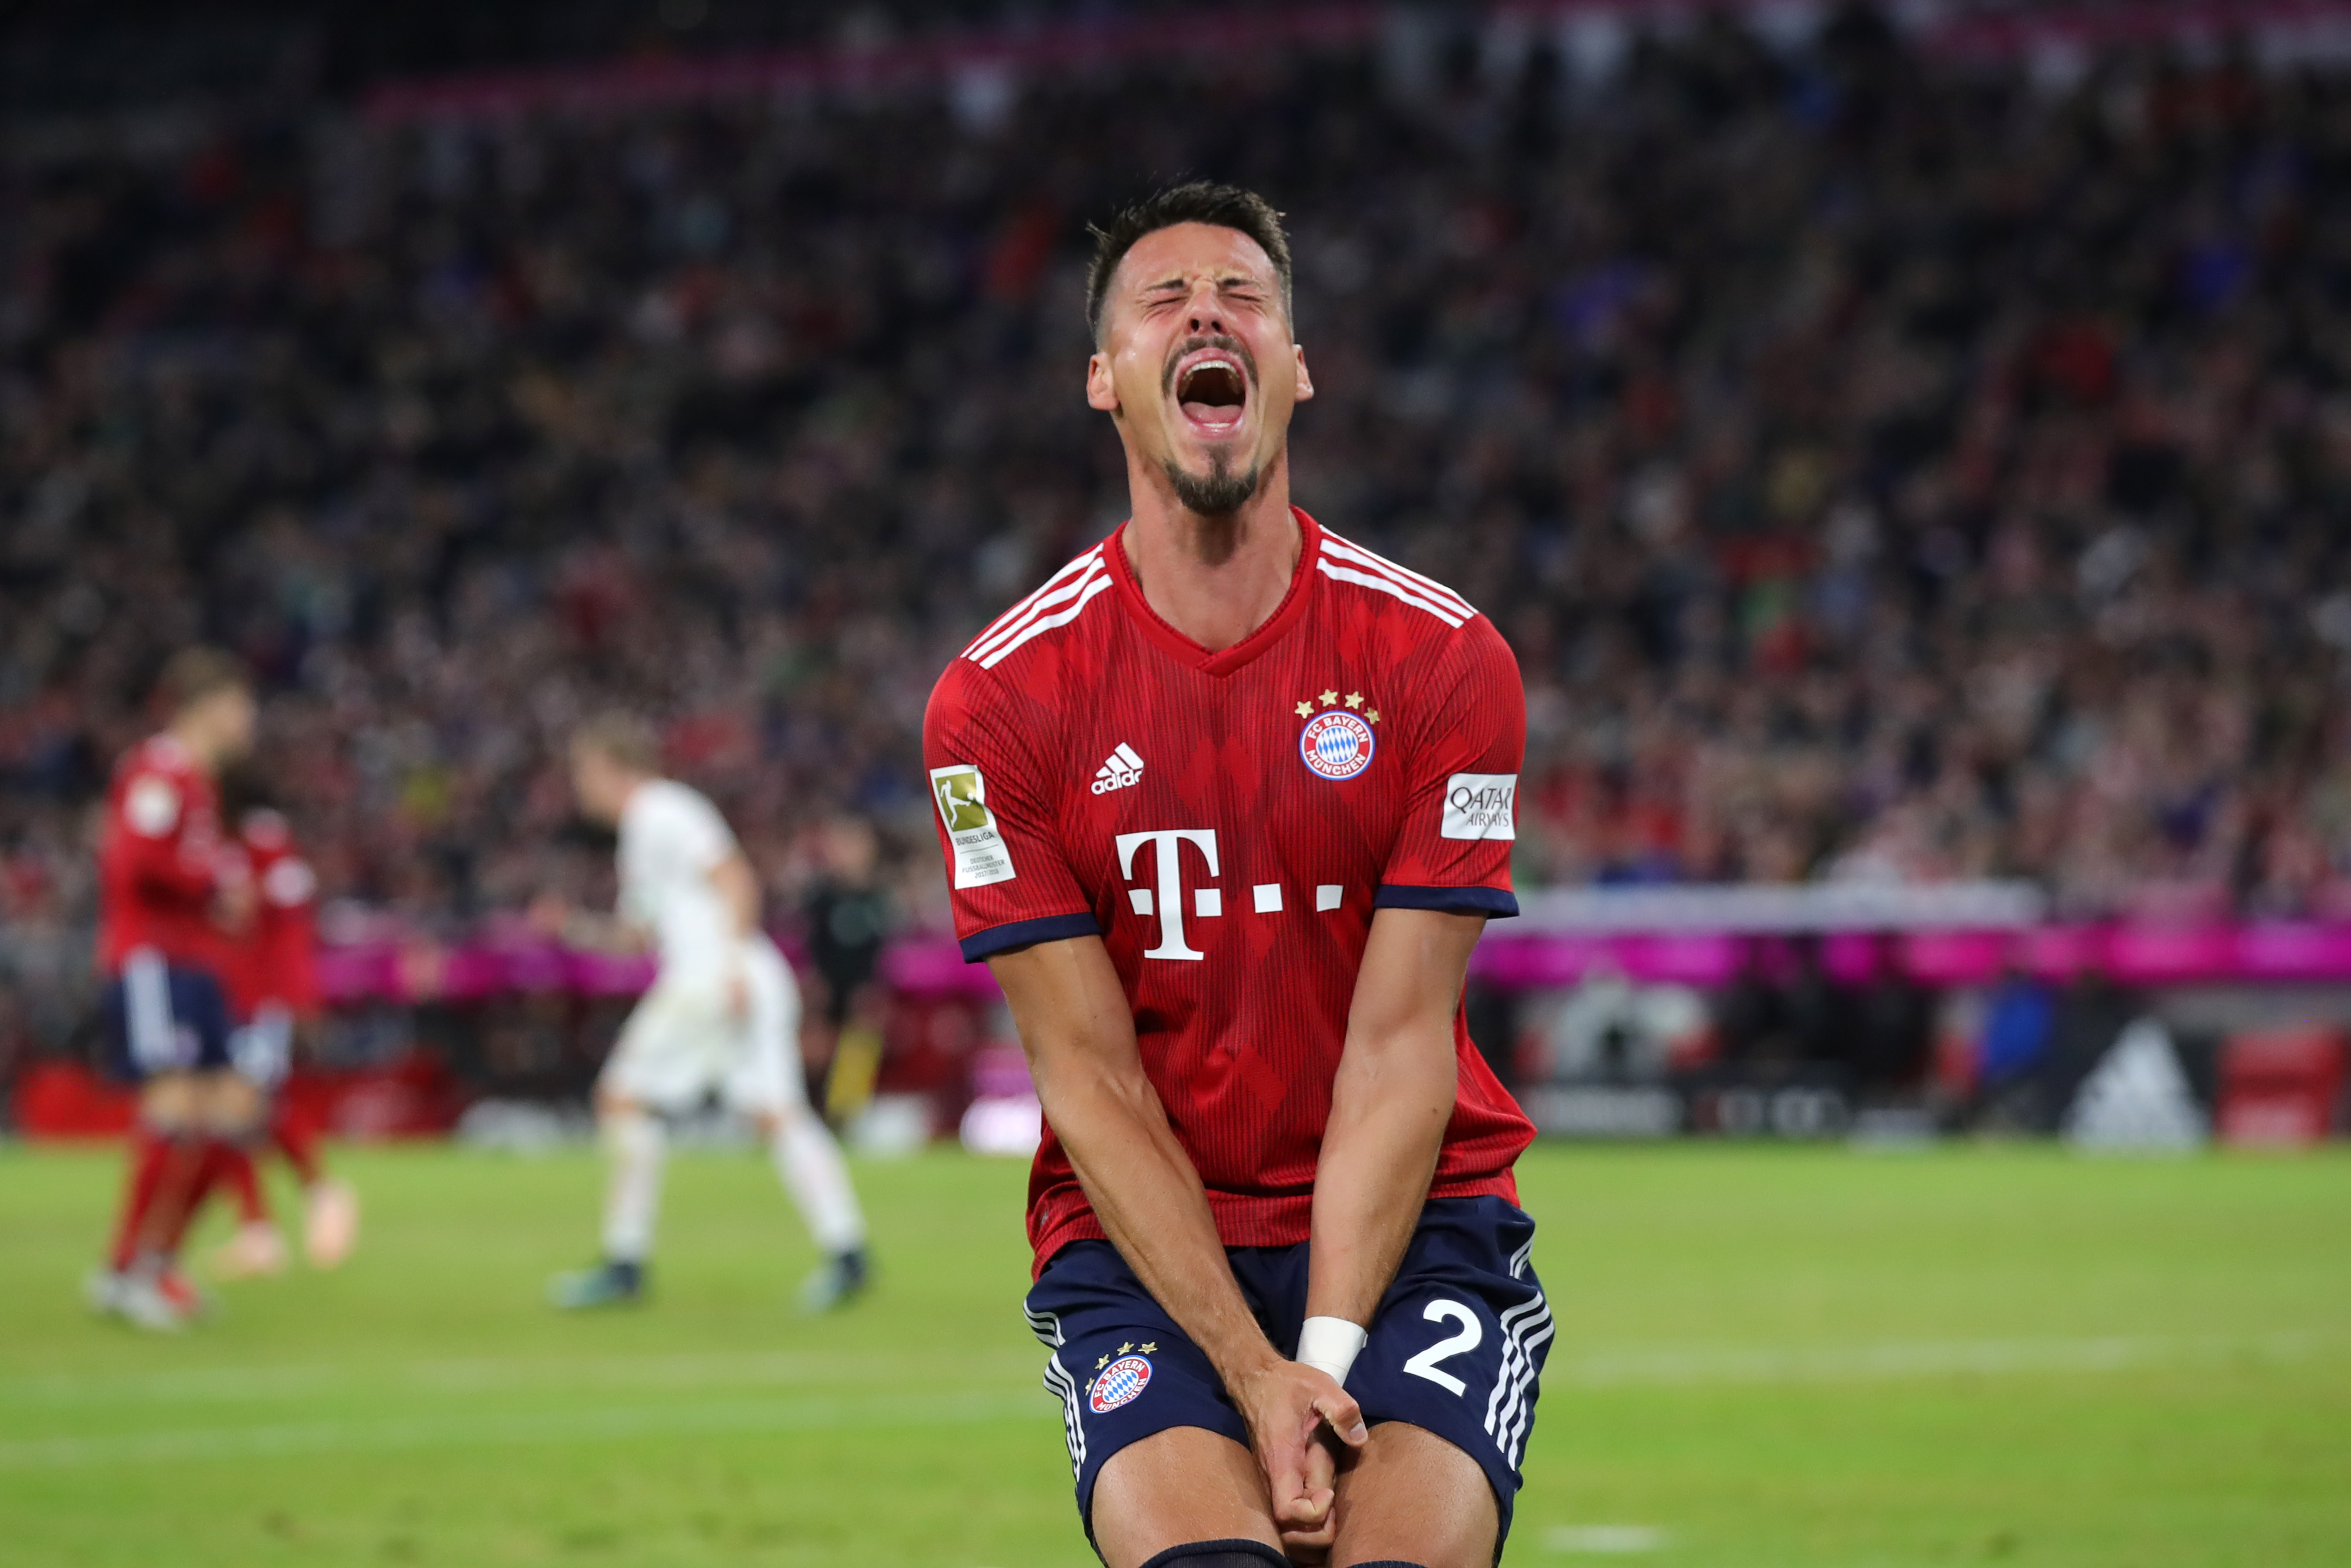 MUNICH, GERMANY - SEPTEMBER 25:  Sandro Wagner of Bayern Munich reacts during the Bundesliga match between FC Bayern Muenchen and FC Augsburg at Allianz Arena on September 25, 2018 in Munich, Germany.  (Photo by Alexander Hassenstein/Bongarts/Getty Images)